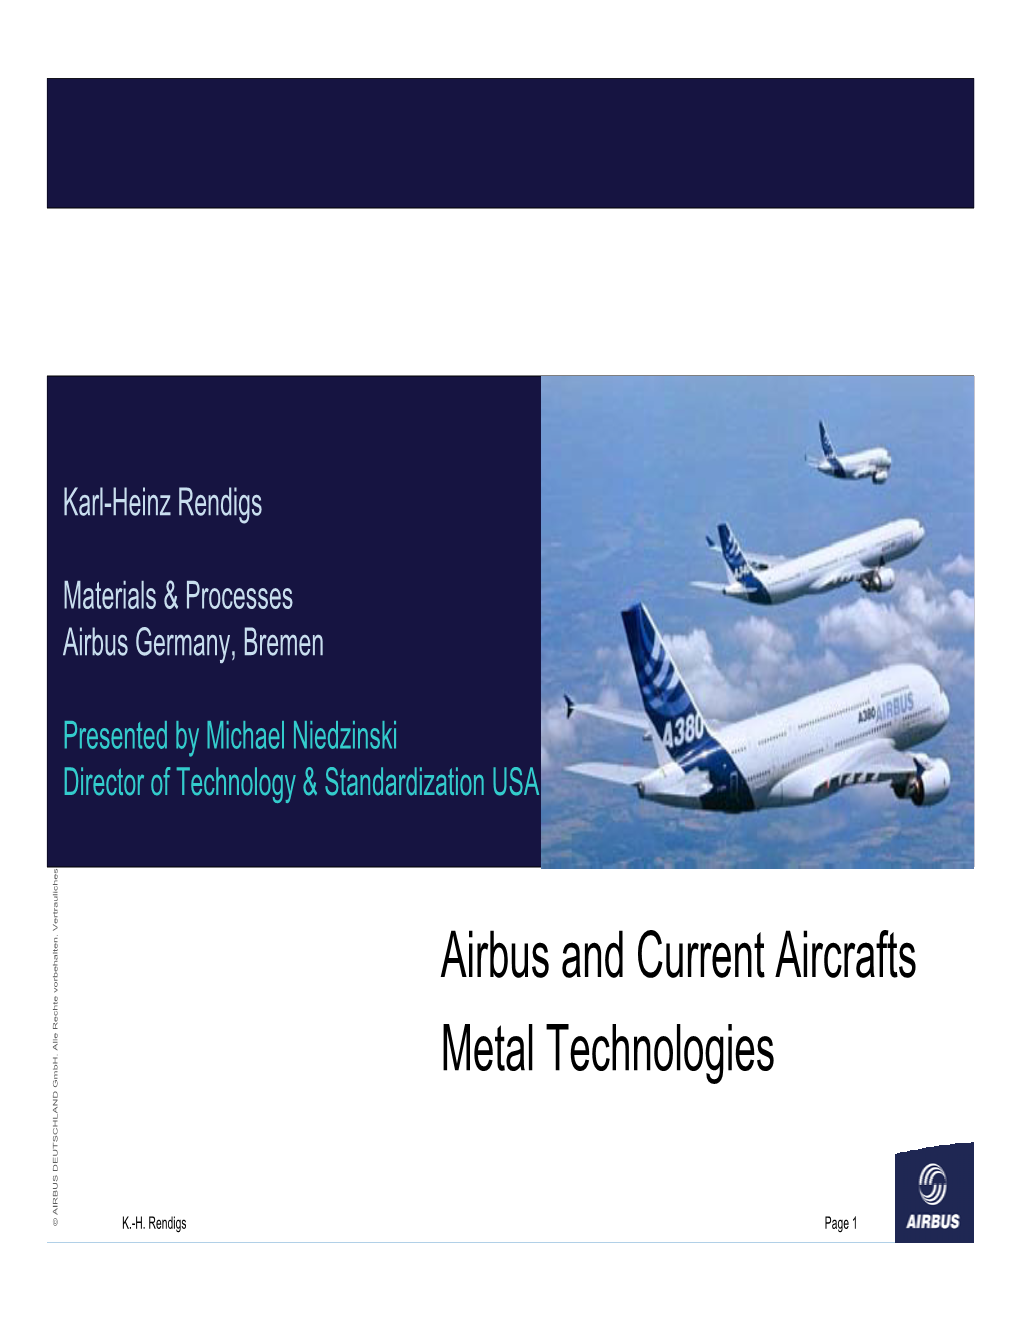 Airbus and Current Aircrafts Metal Technologies